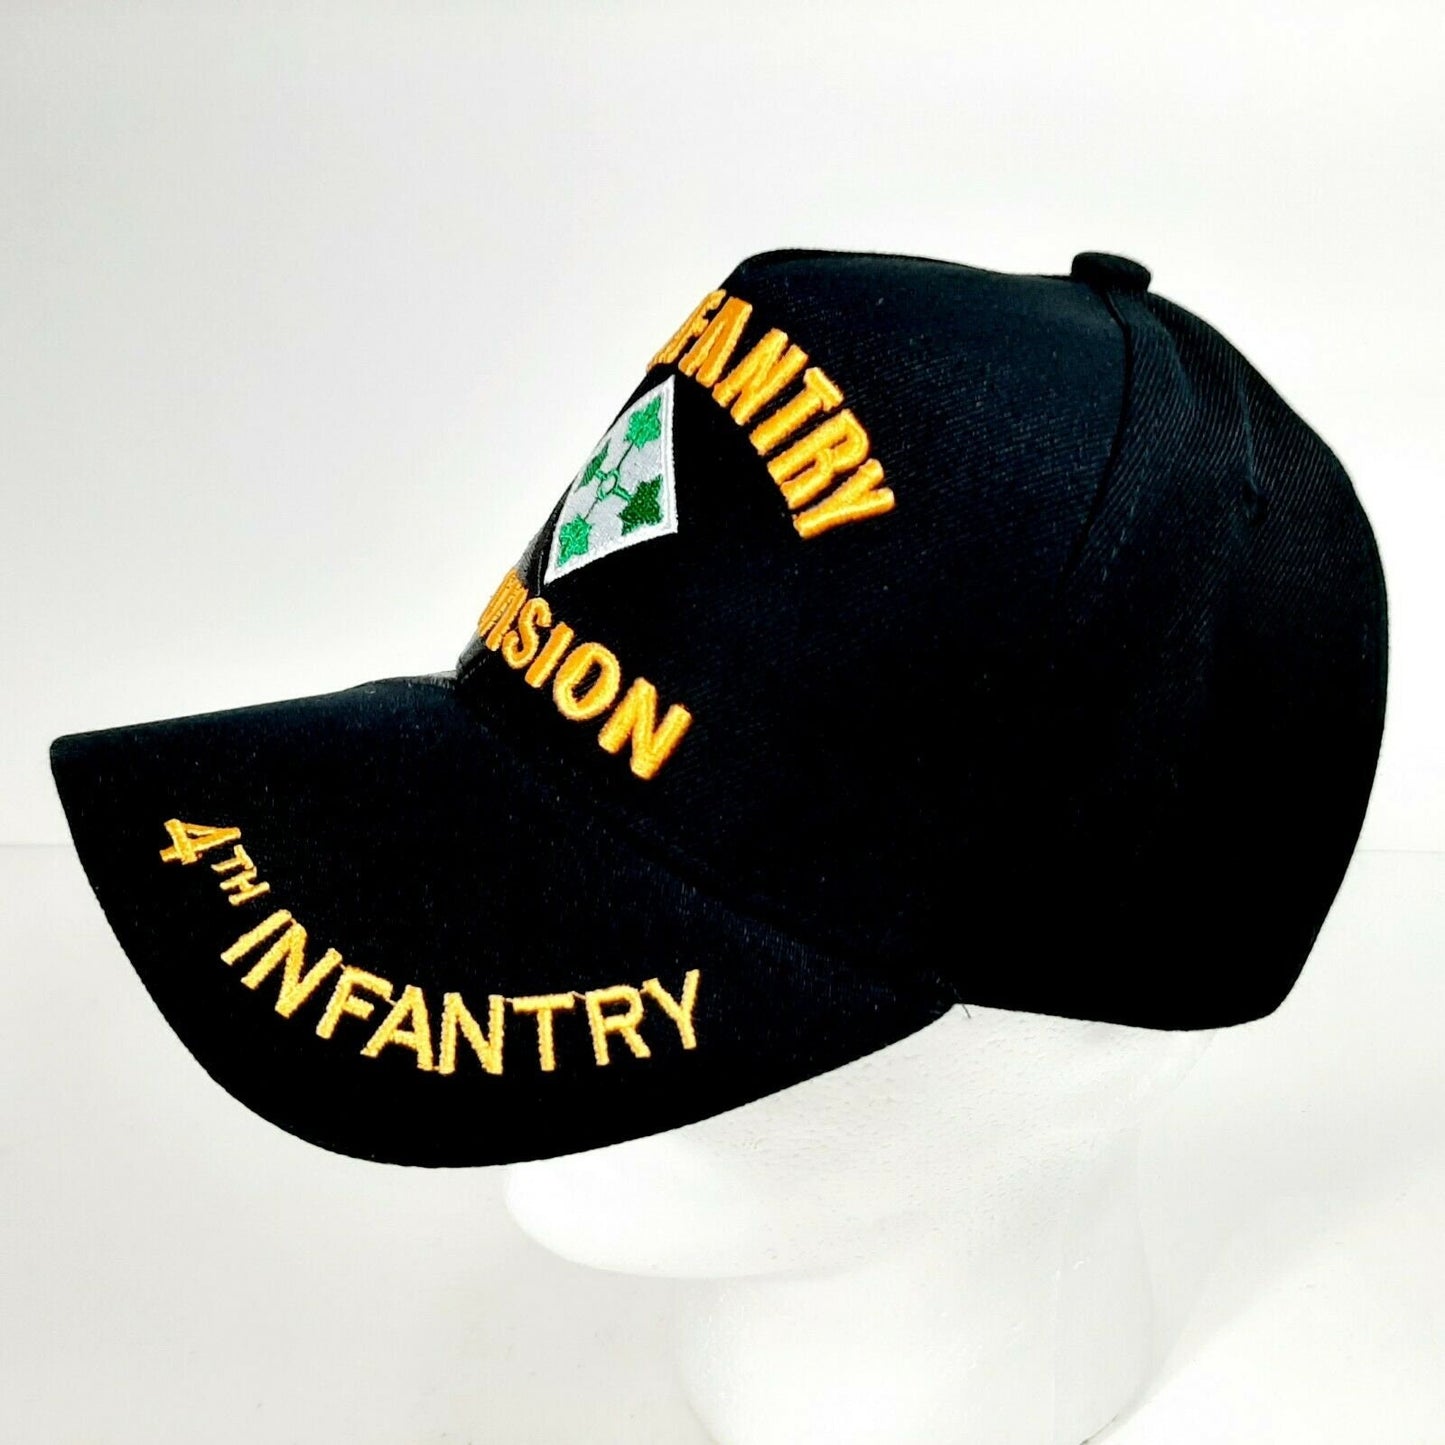 US Army 4th Infantry Division Men's Ball Cap Hat Black Acrylic Embroidered